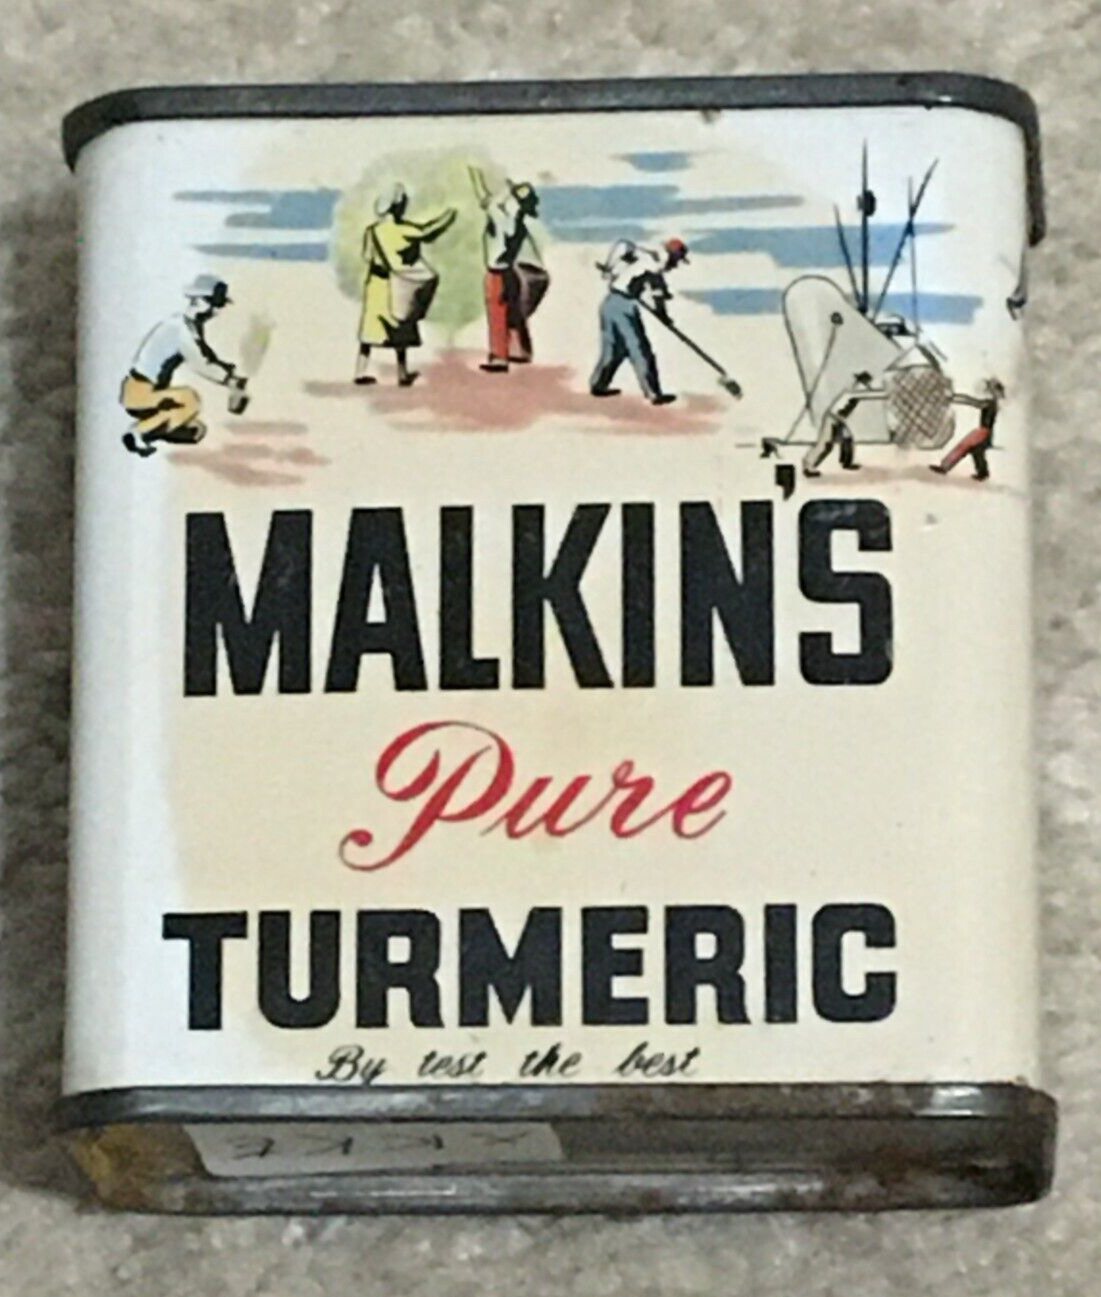 Vntg Malkin\'s Turmeric Spice Tin Litho Can Container  1 1/2 OZ, Vancouver Canada